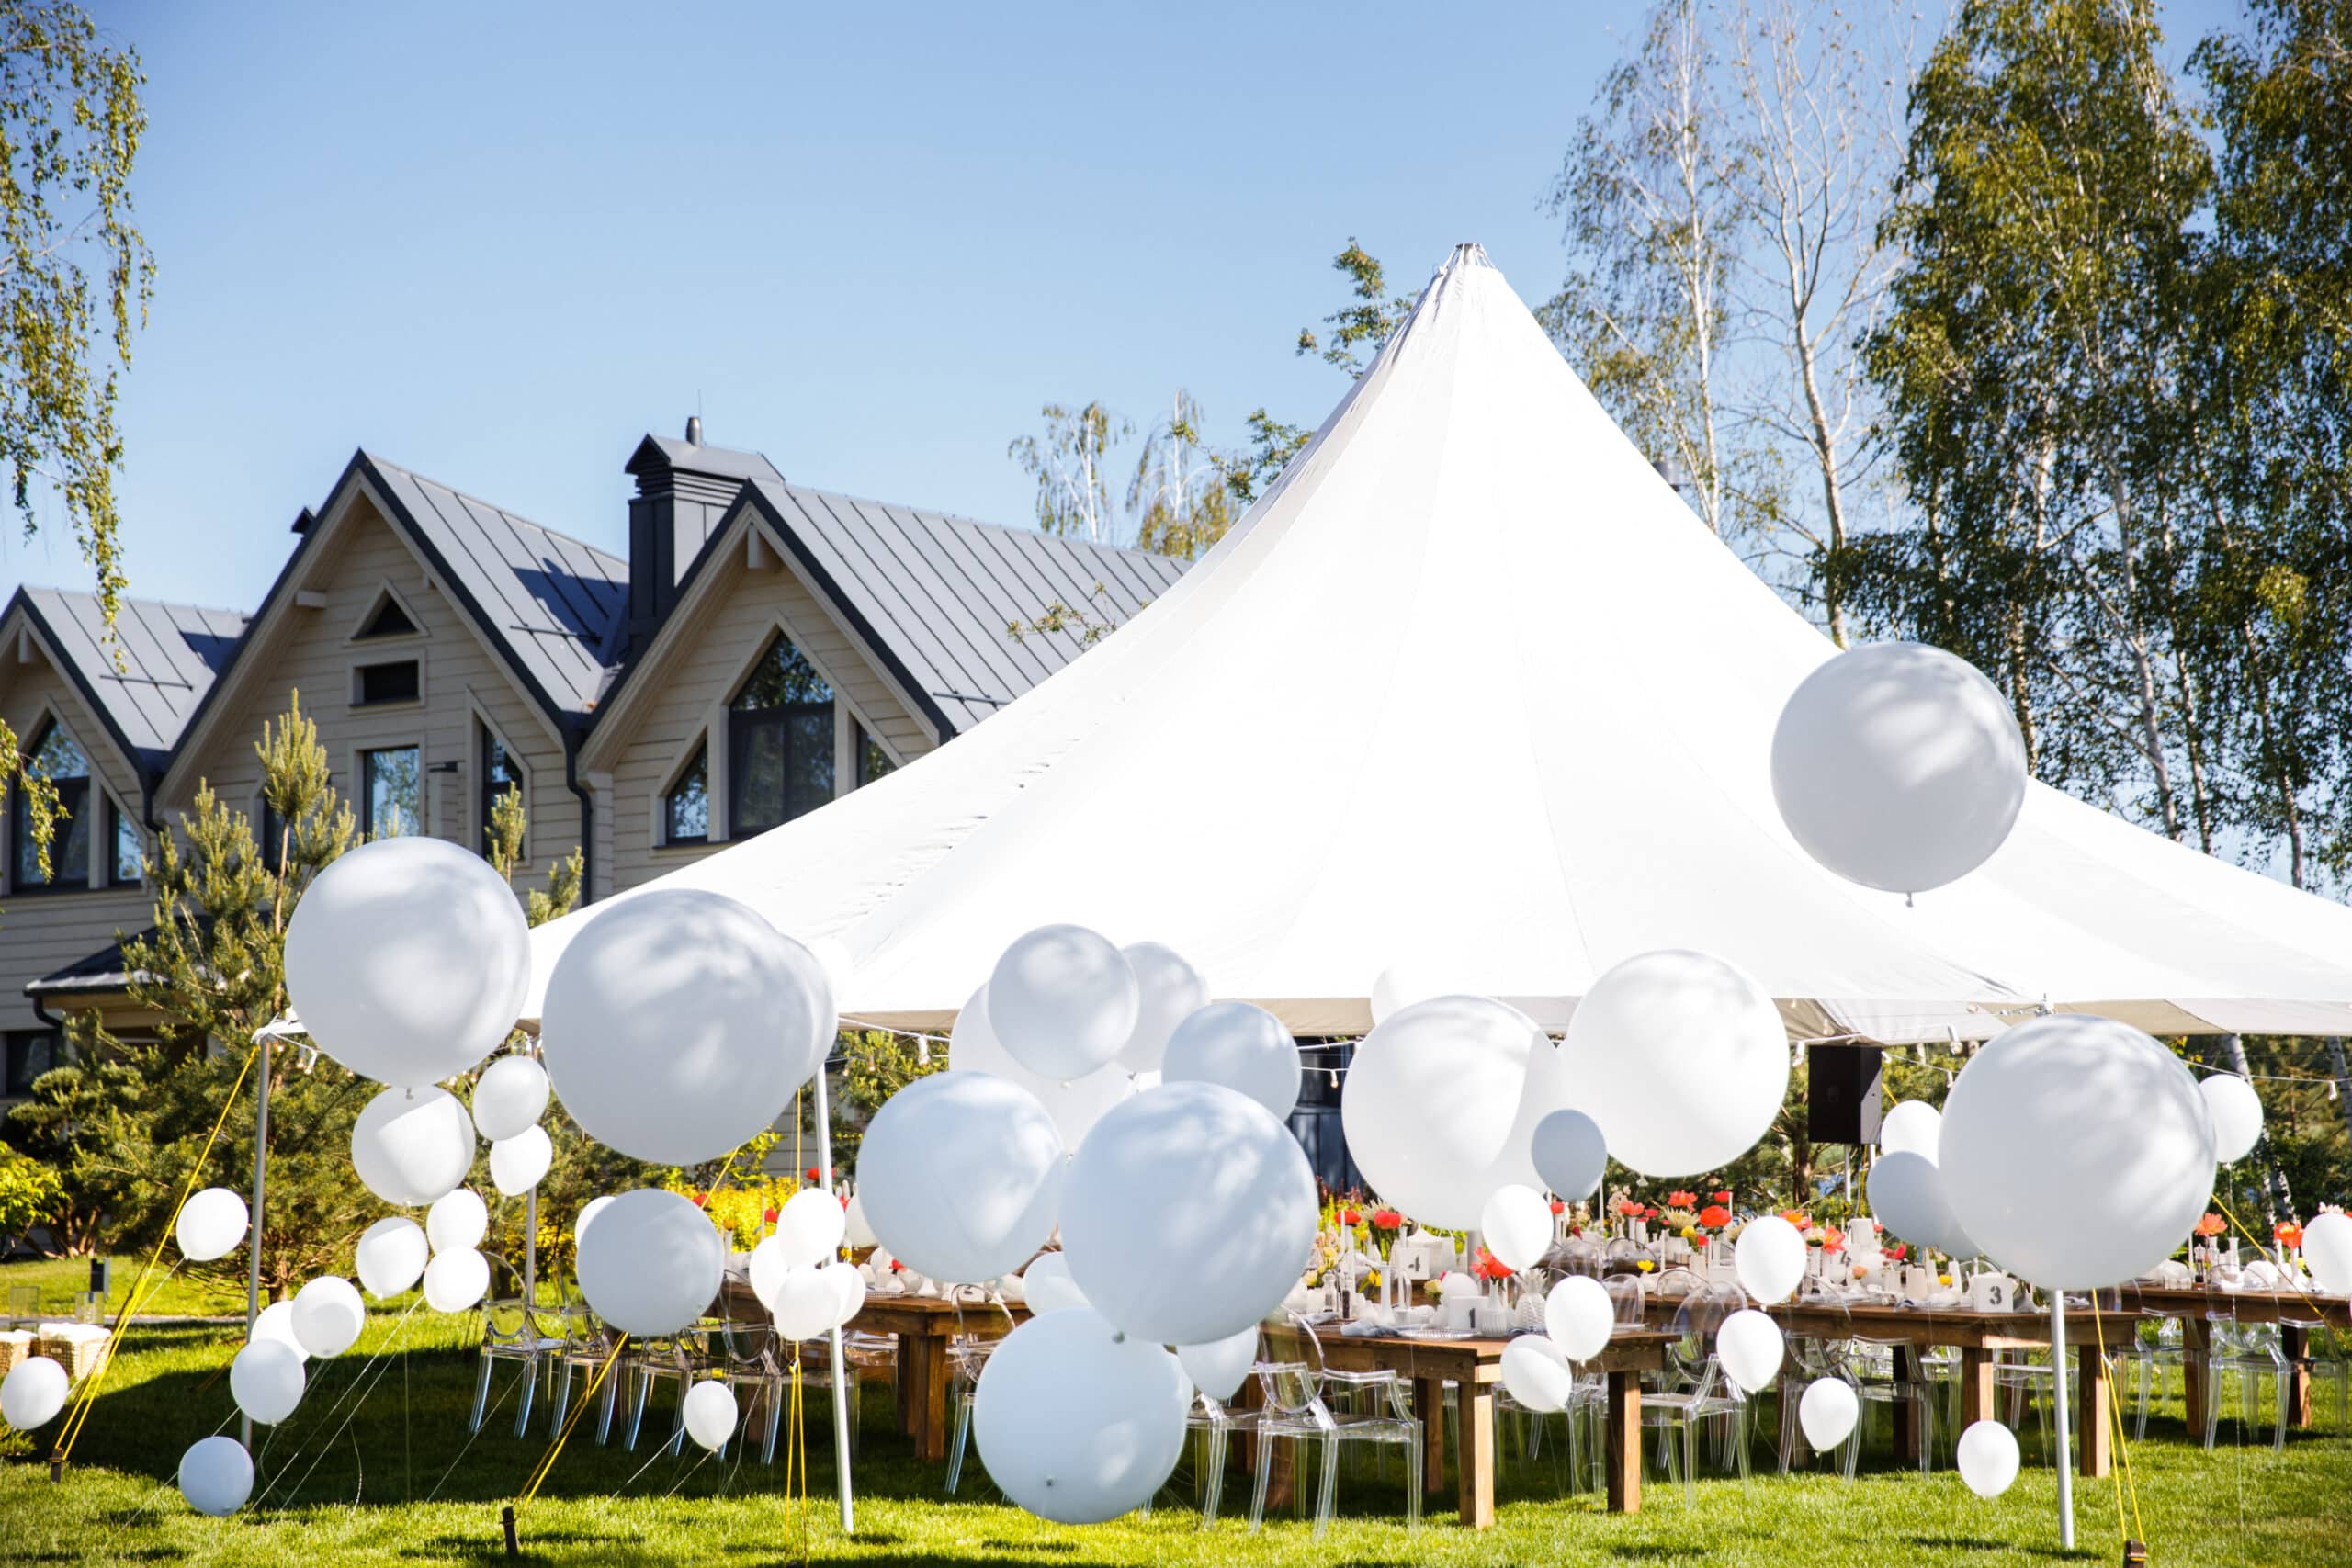 MA Tent Rental: Throw a Summer Bash in the Shade